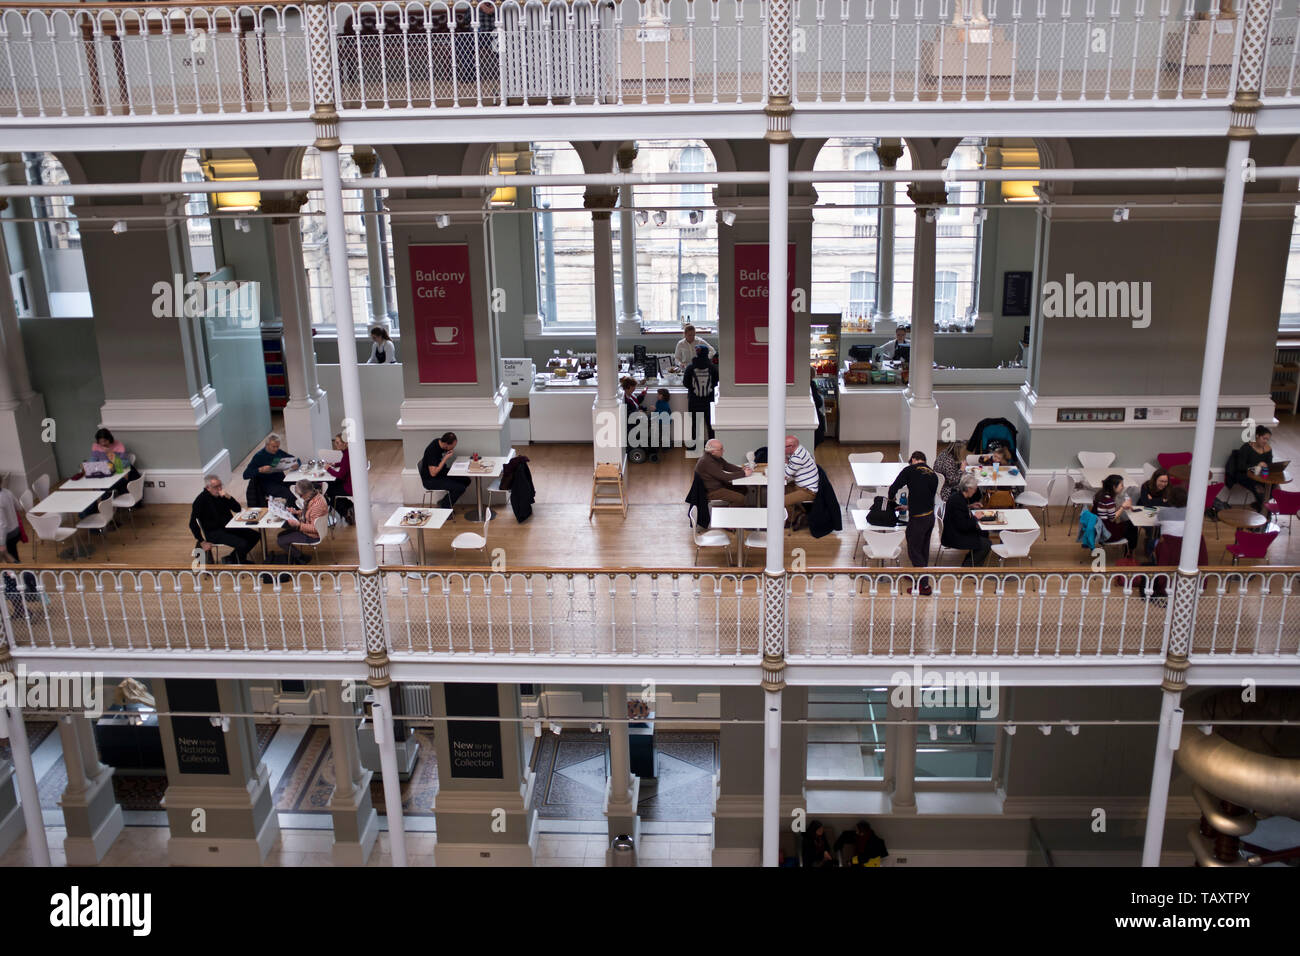 dh Museums Balcony Cafe CHAMBER STREET EDINBURGH People in cafes Scottish National museum of Scotland Stock Photo